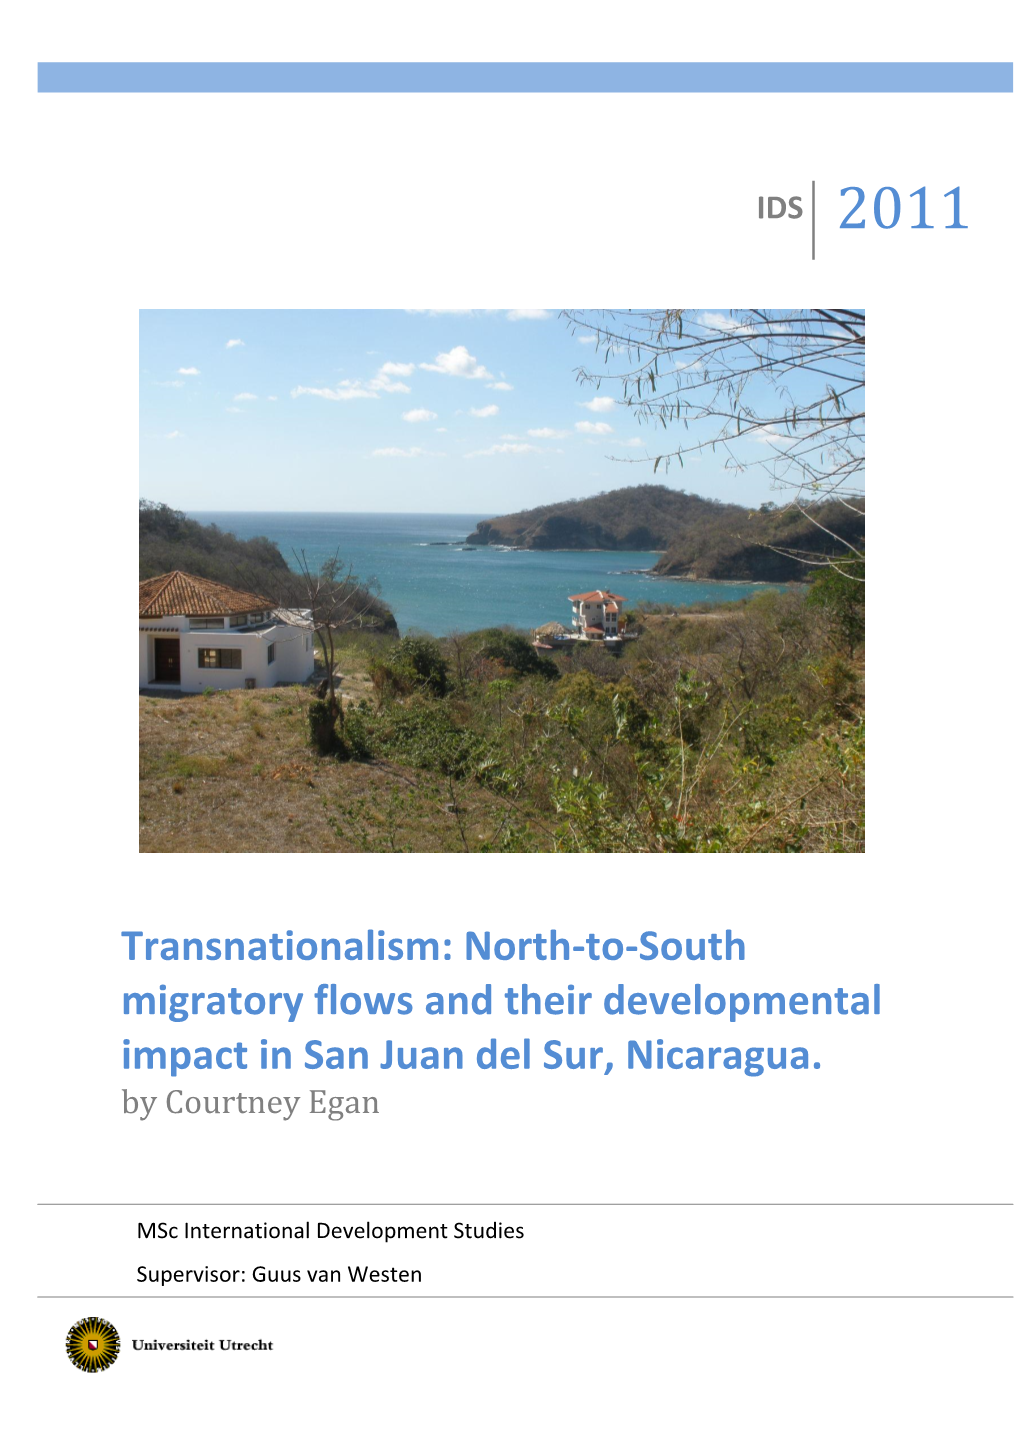 North-To-South Migratory Flows and Their Developmental Impact in San Juan Del Sur, Nicaragua